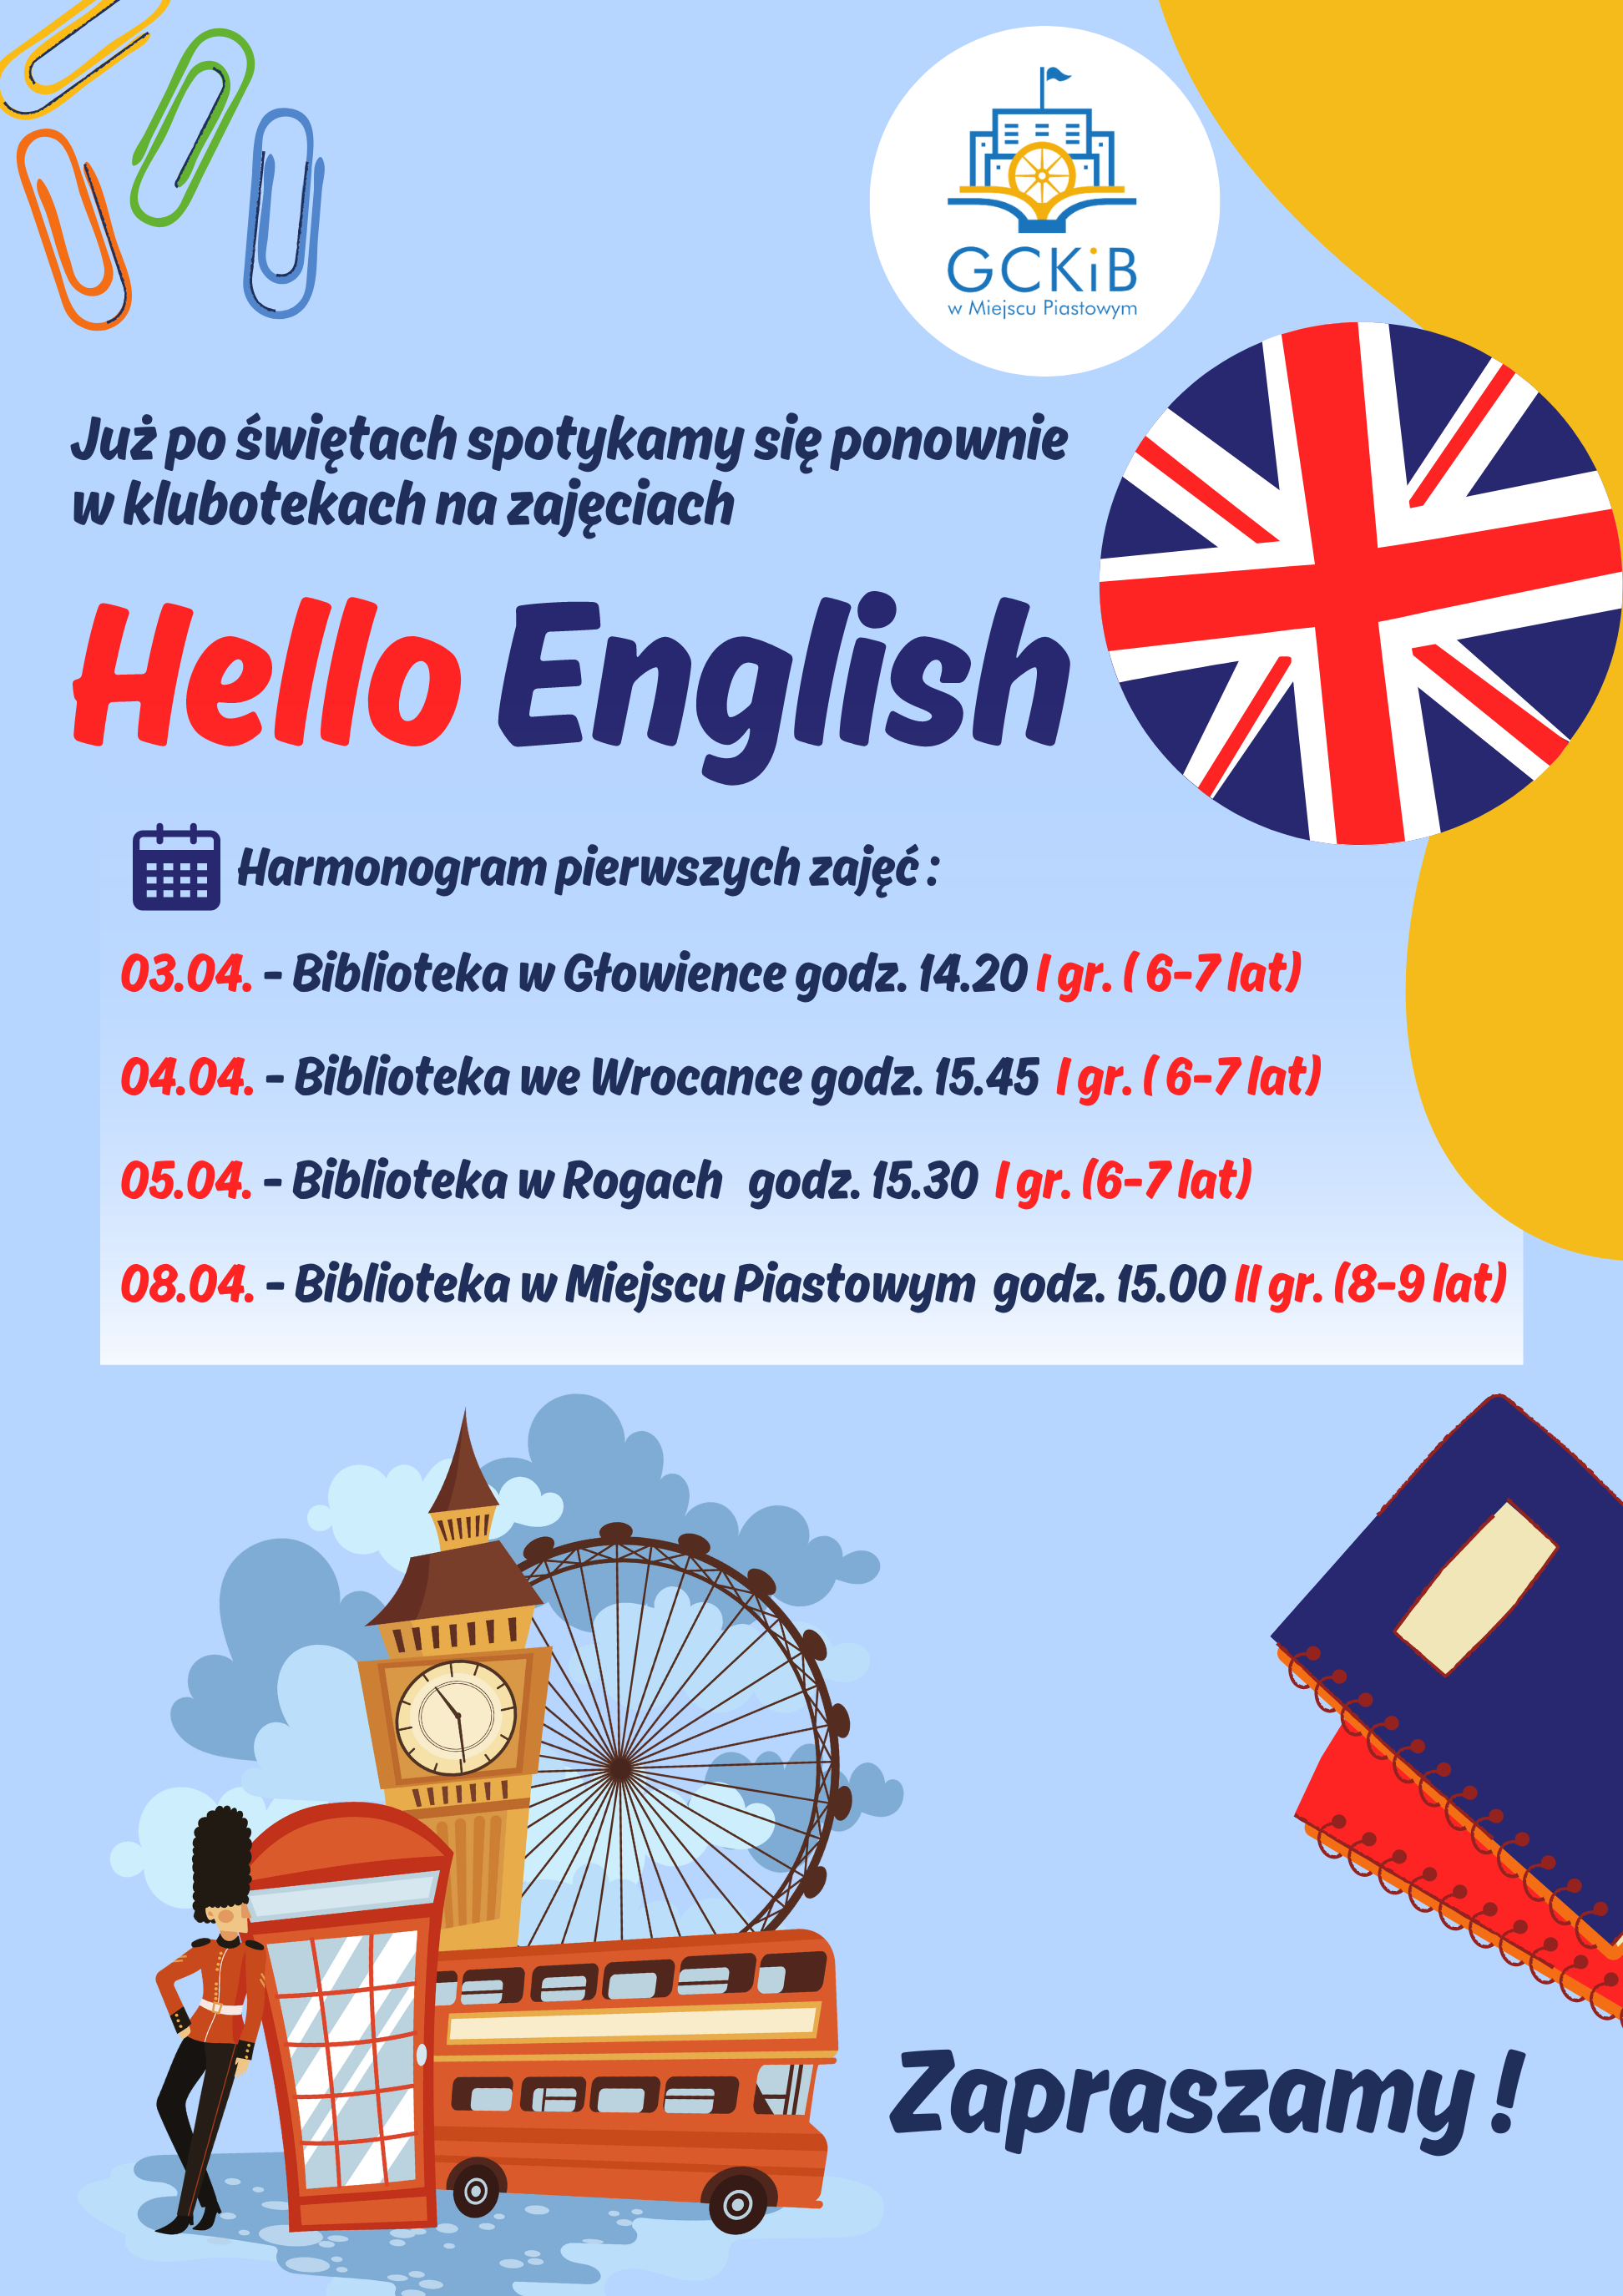 You are currently viewing Hello English w klubotekach